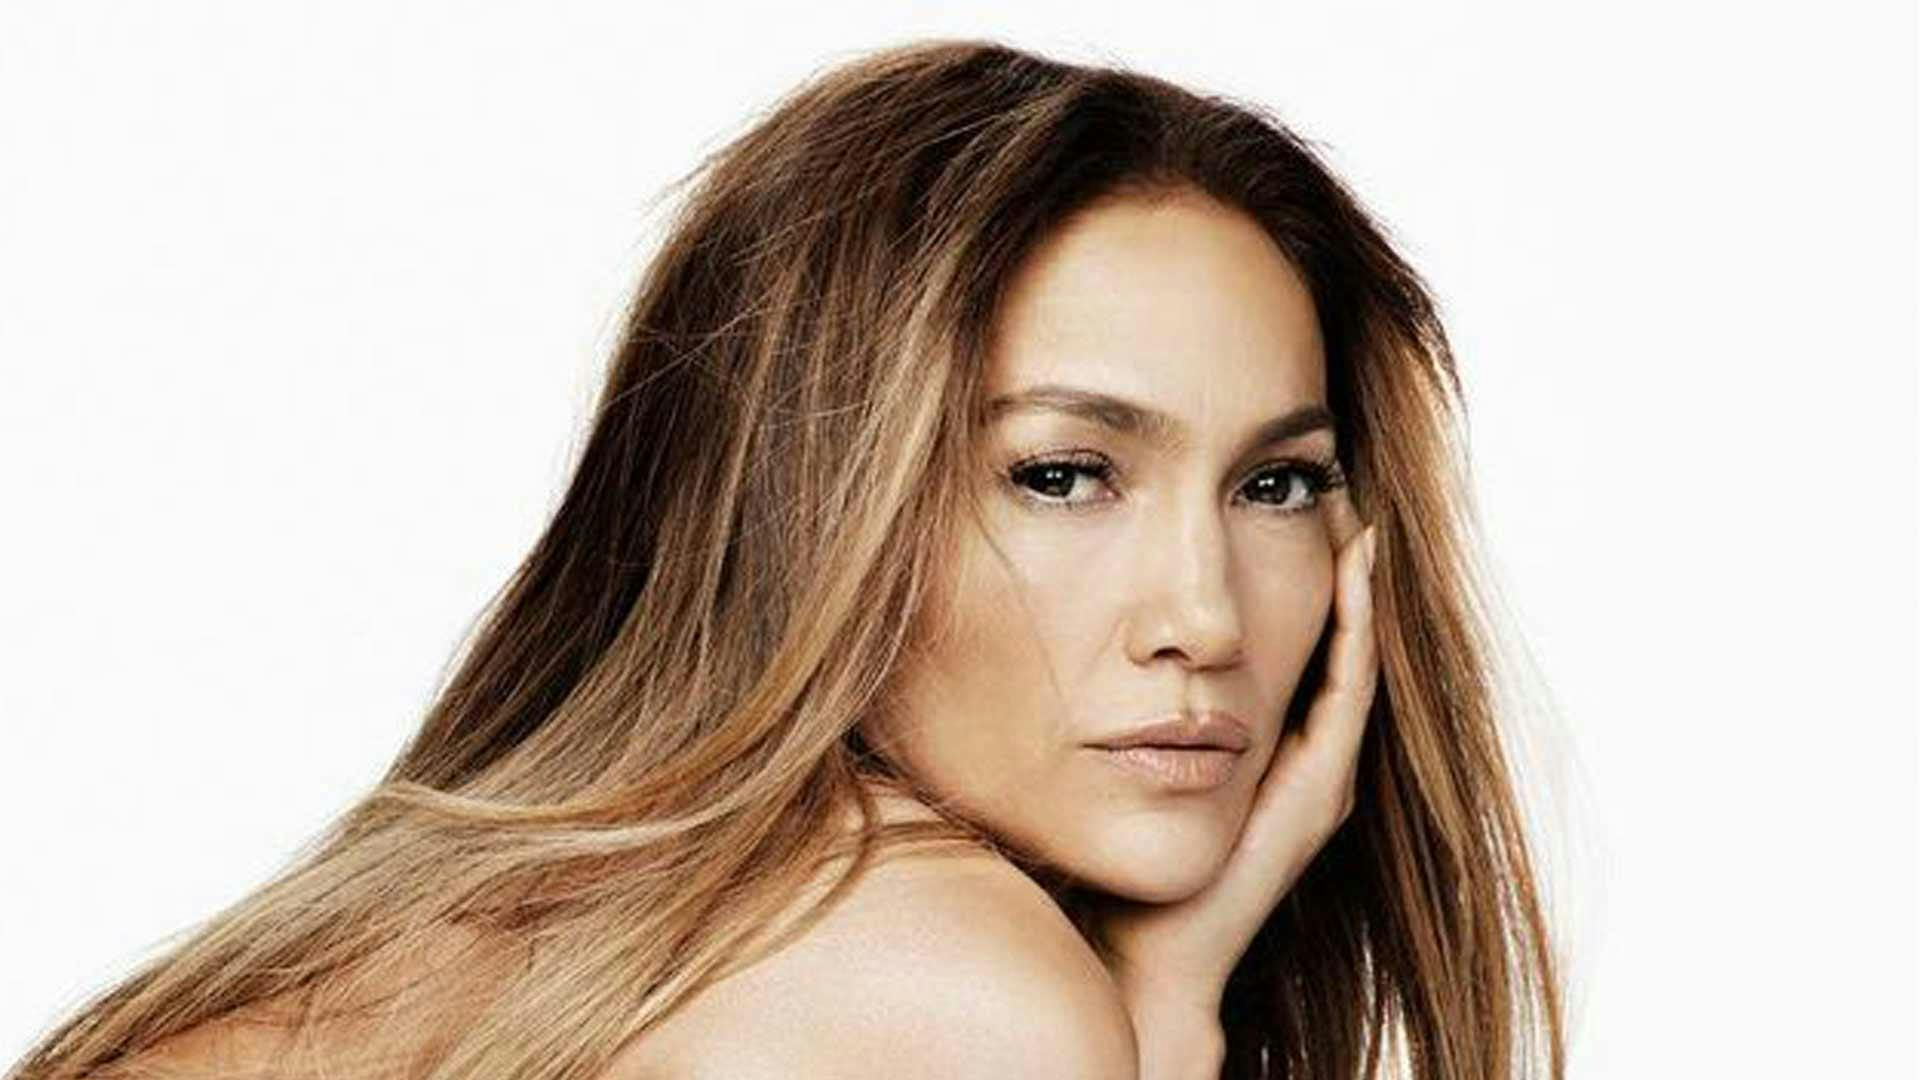 JLo posing for the camera.